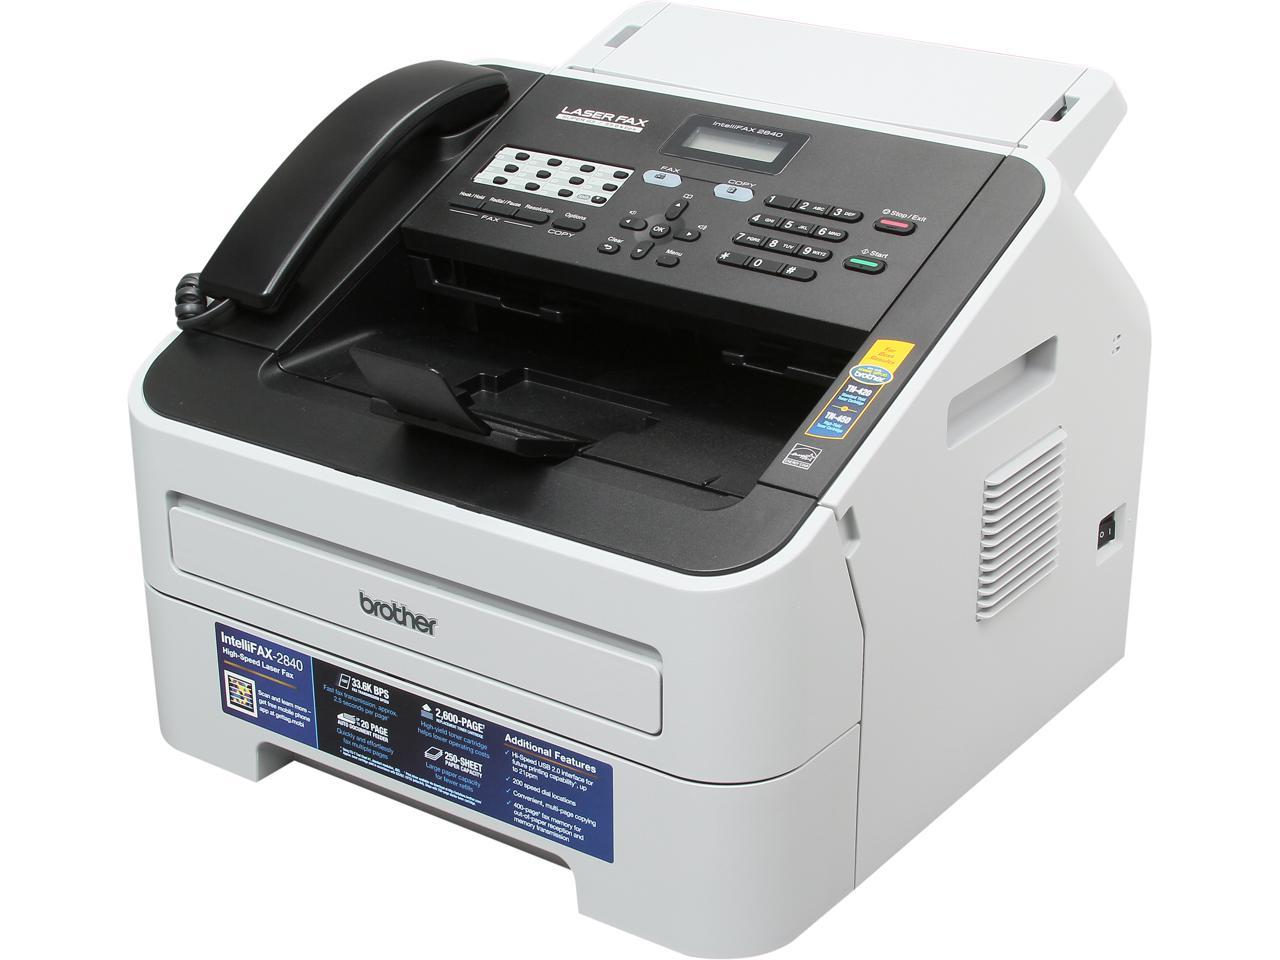 brother fax 2840 software download